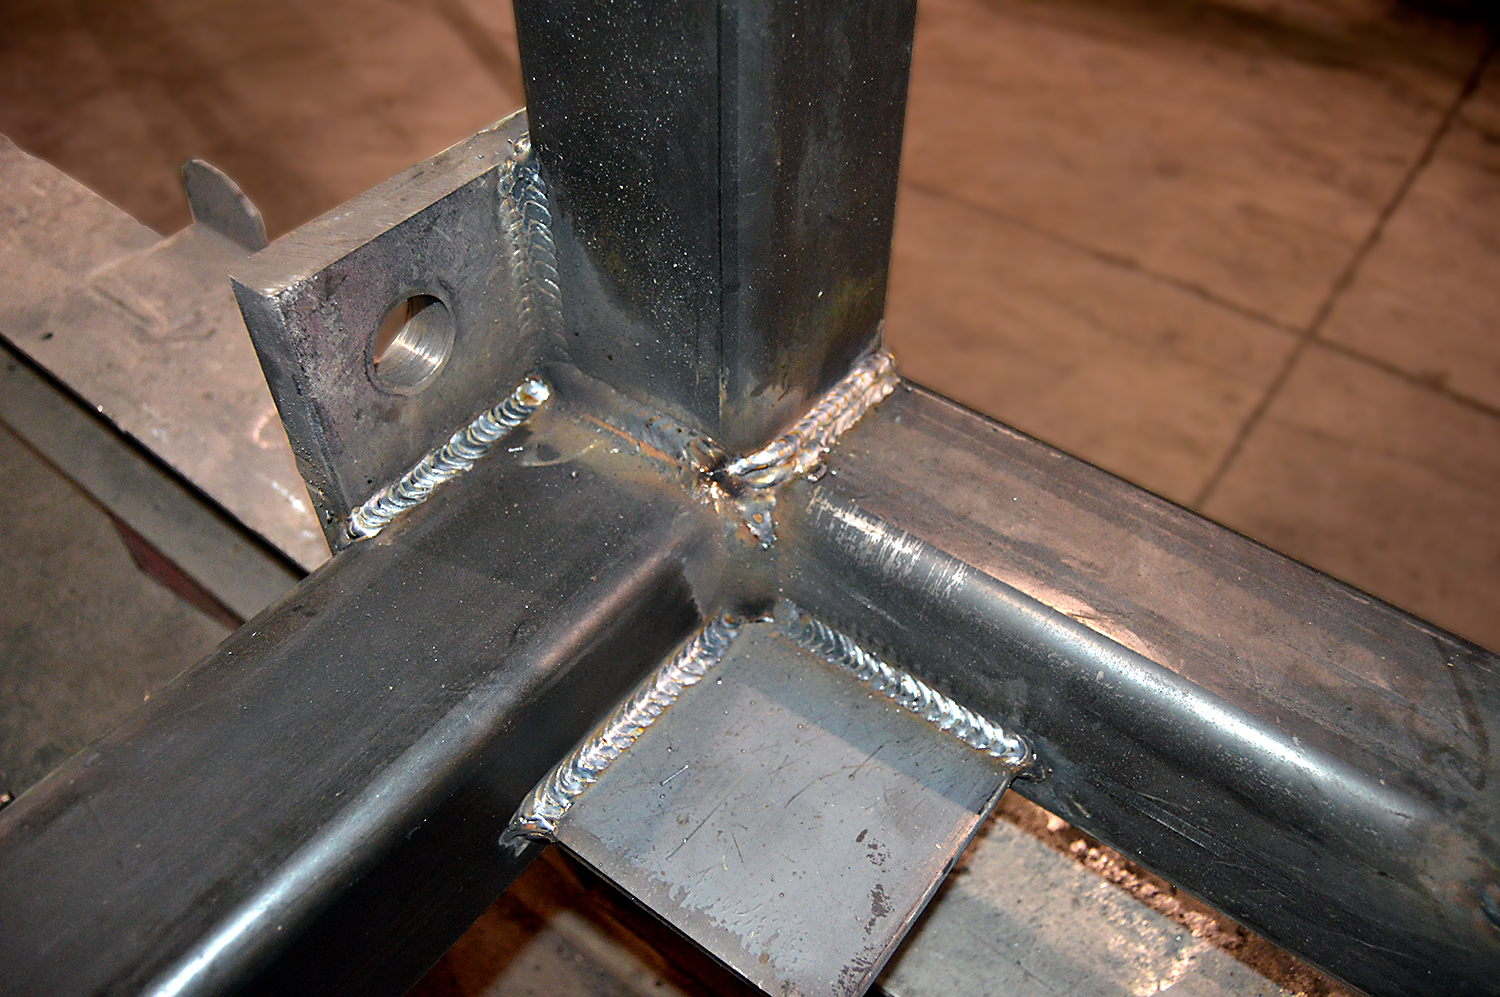 Heavy steel plate added for elevator stability